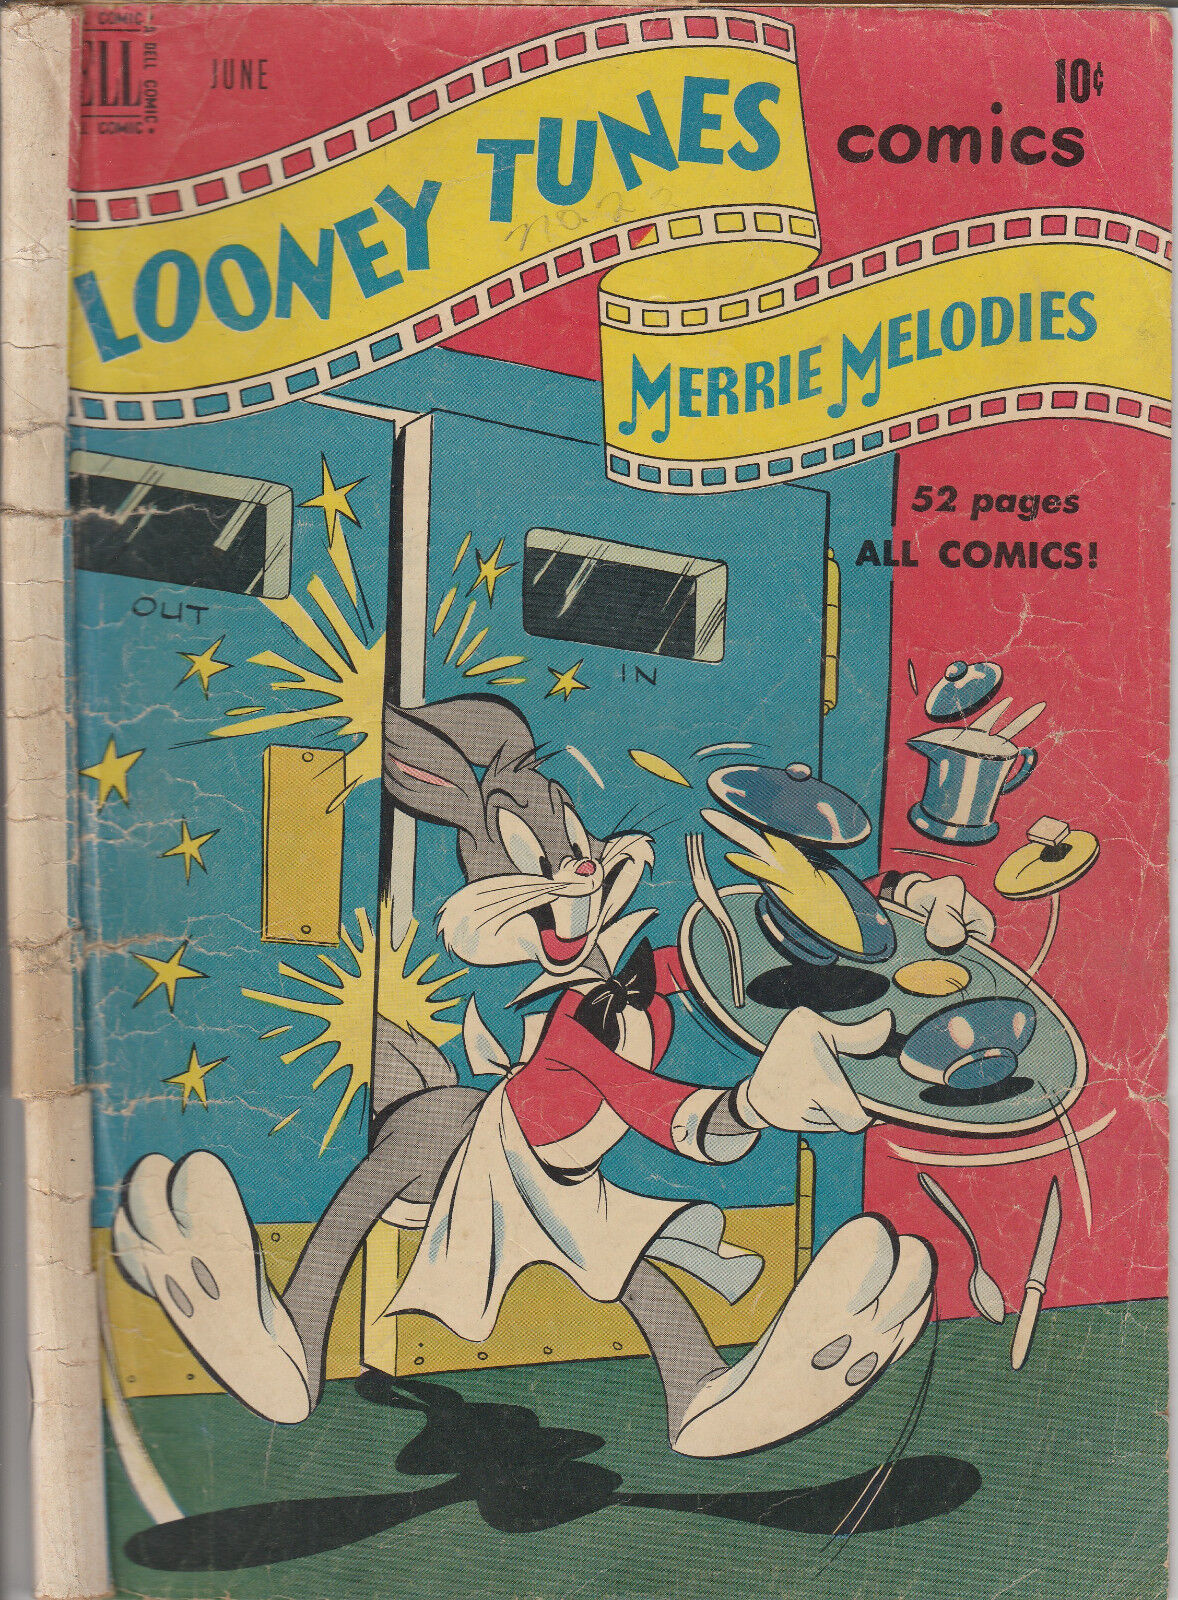 1950 Looney Tunes #104 Dell Comics Merrie Melodies Bugs Bunny Porky Pig VINTAGE